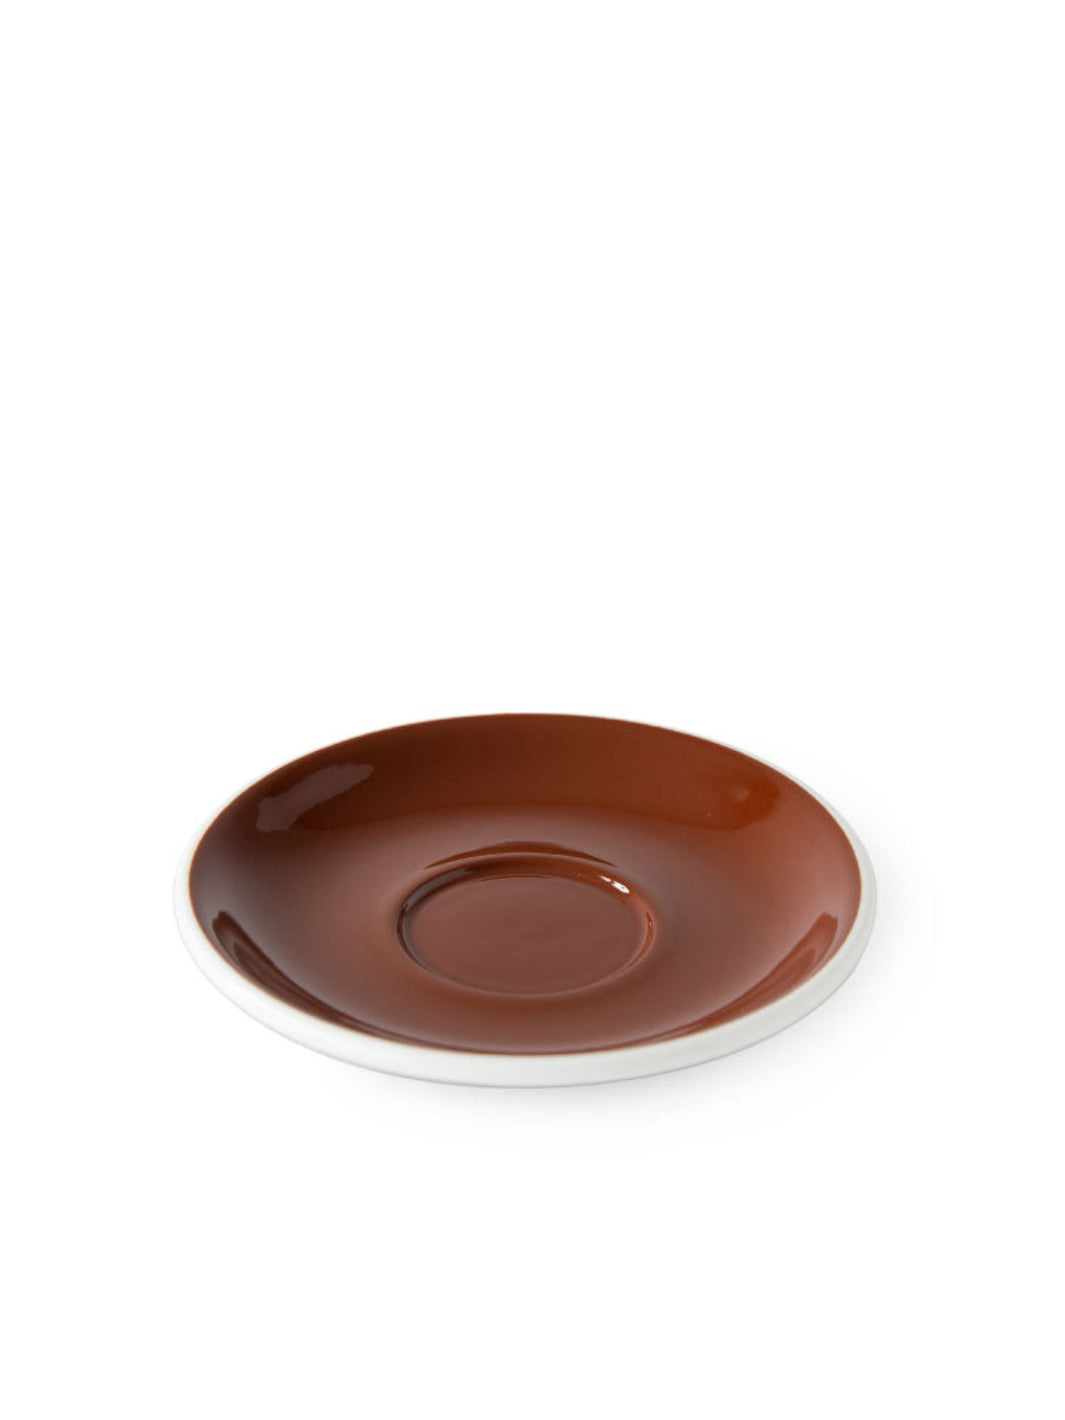 ACME Espresso Saucer (14cm/5.51in) / Saucers | Eight Ounce Coffee